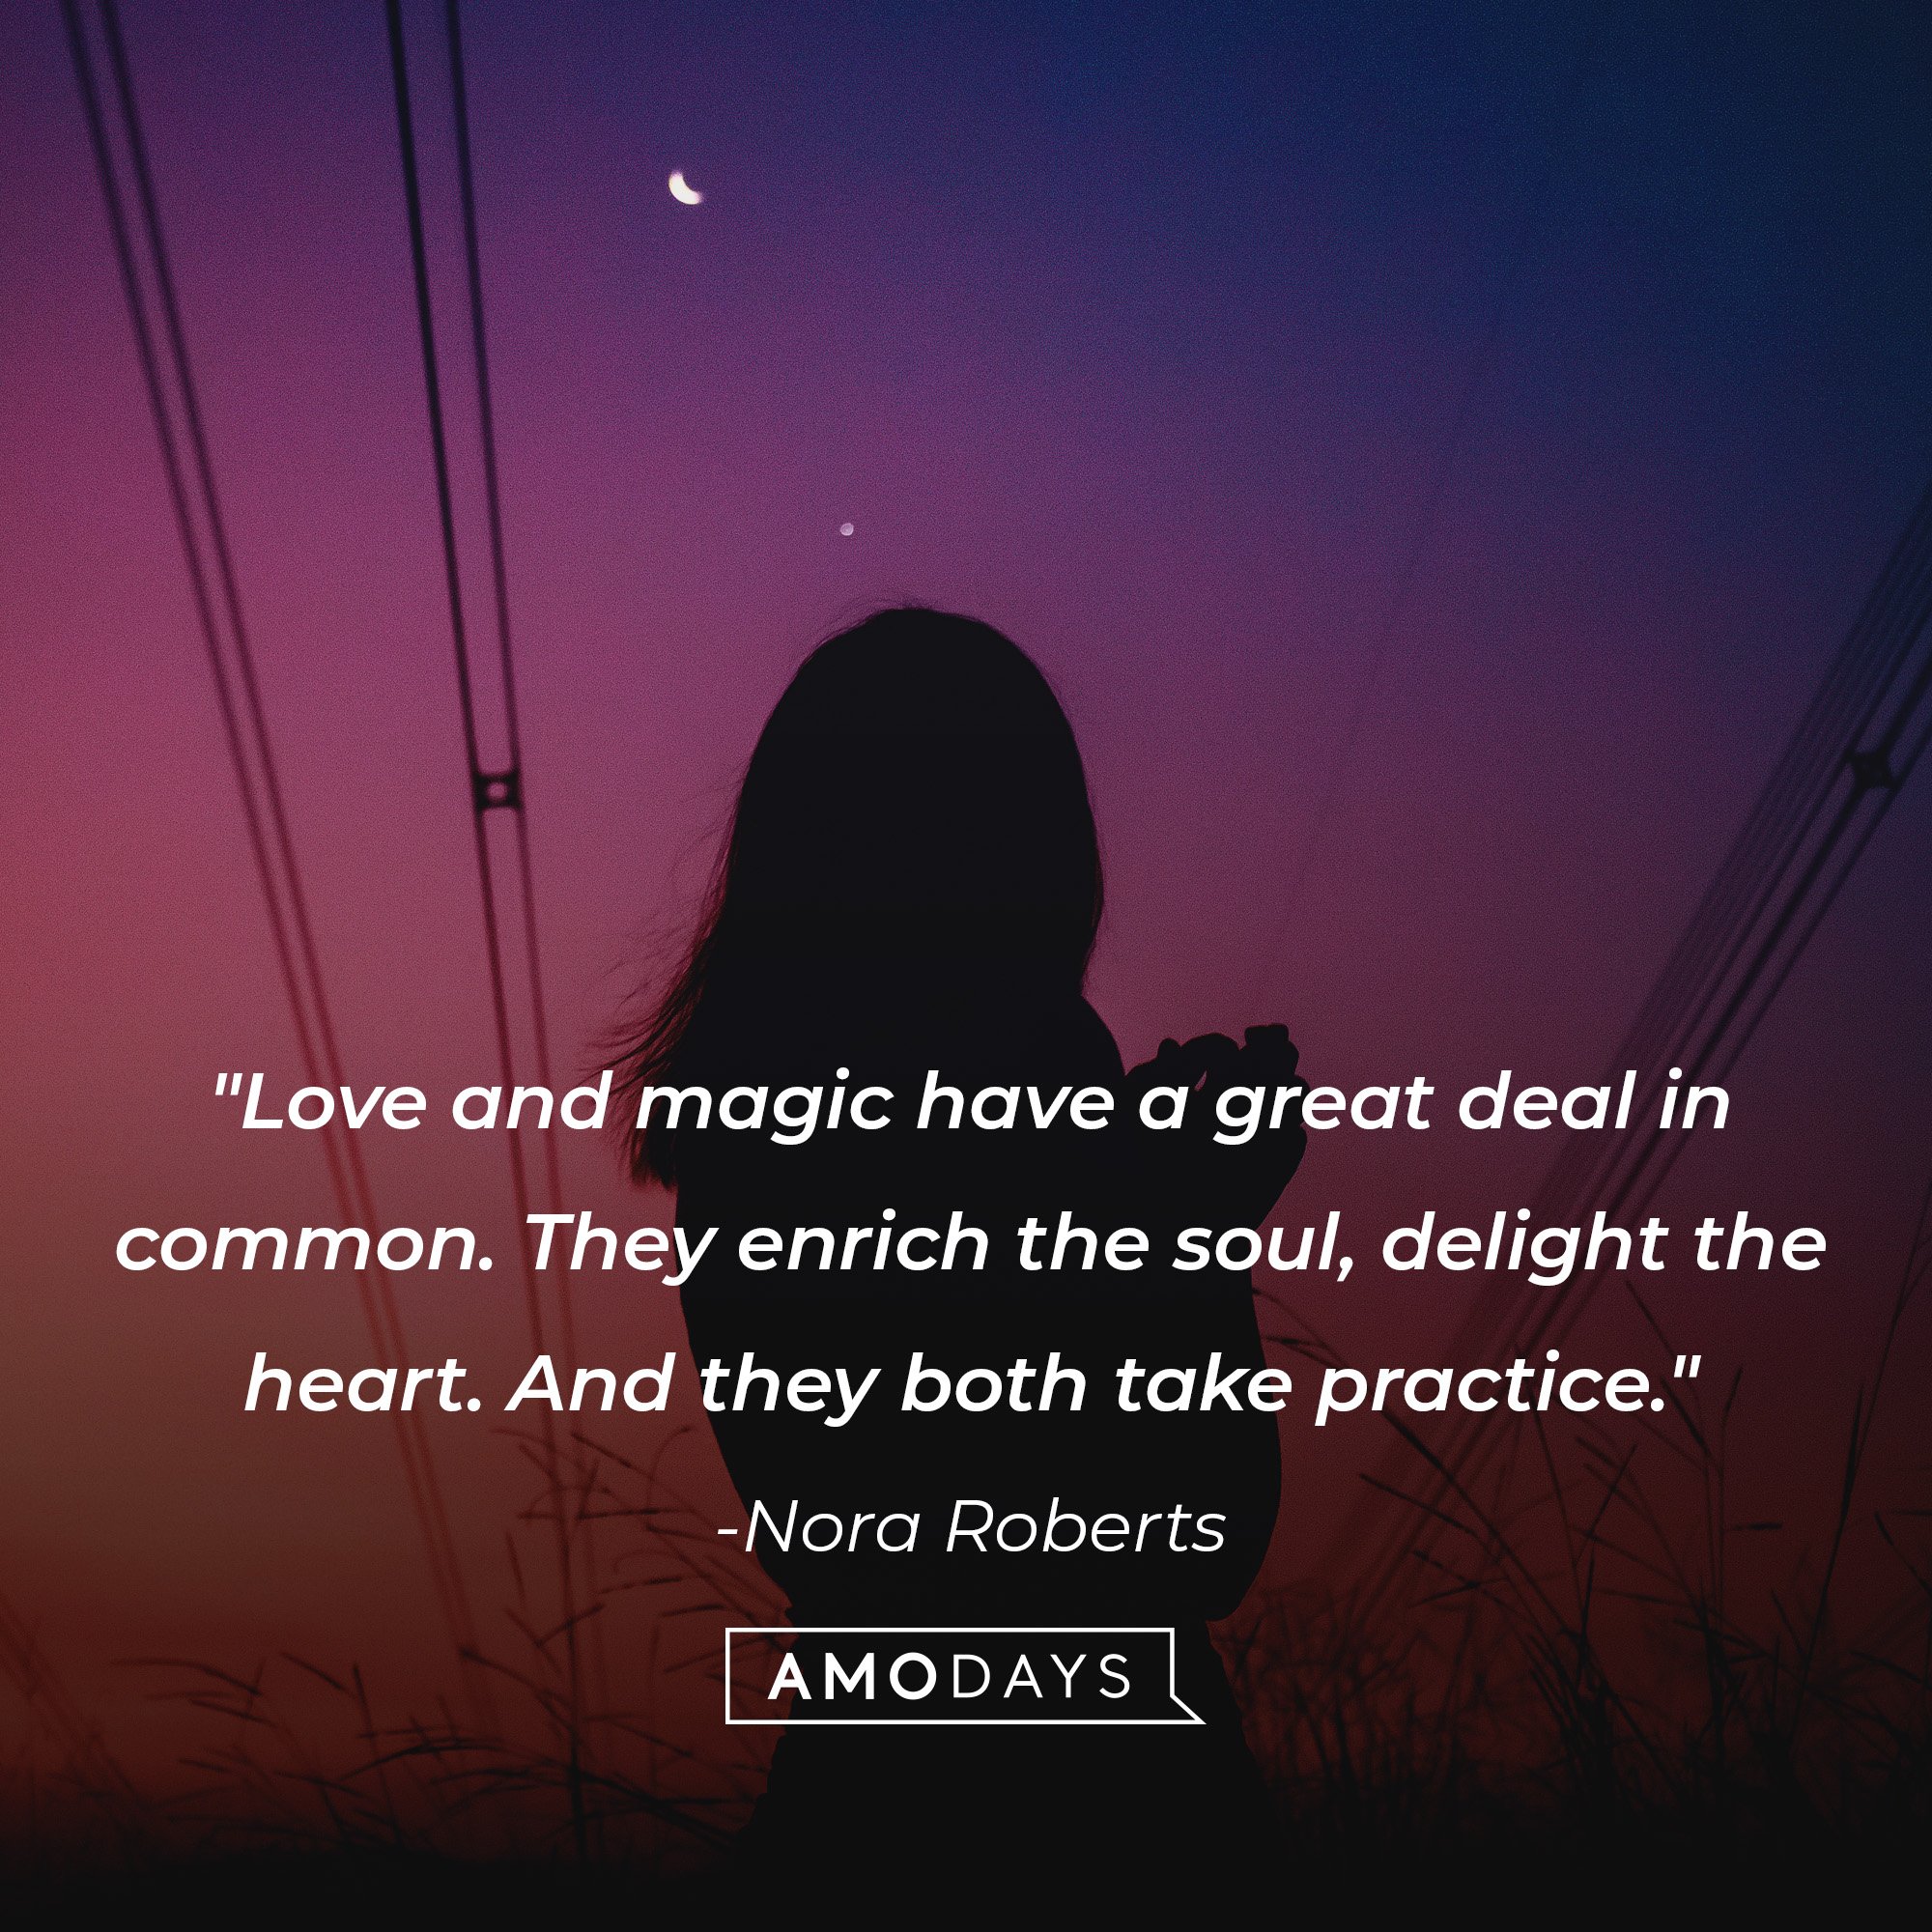 Nora Roberts’ quote: "Love and magic have a great deal in common. They enrich the soul, delight the heart. And they both take practice." | Image: AmoDays